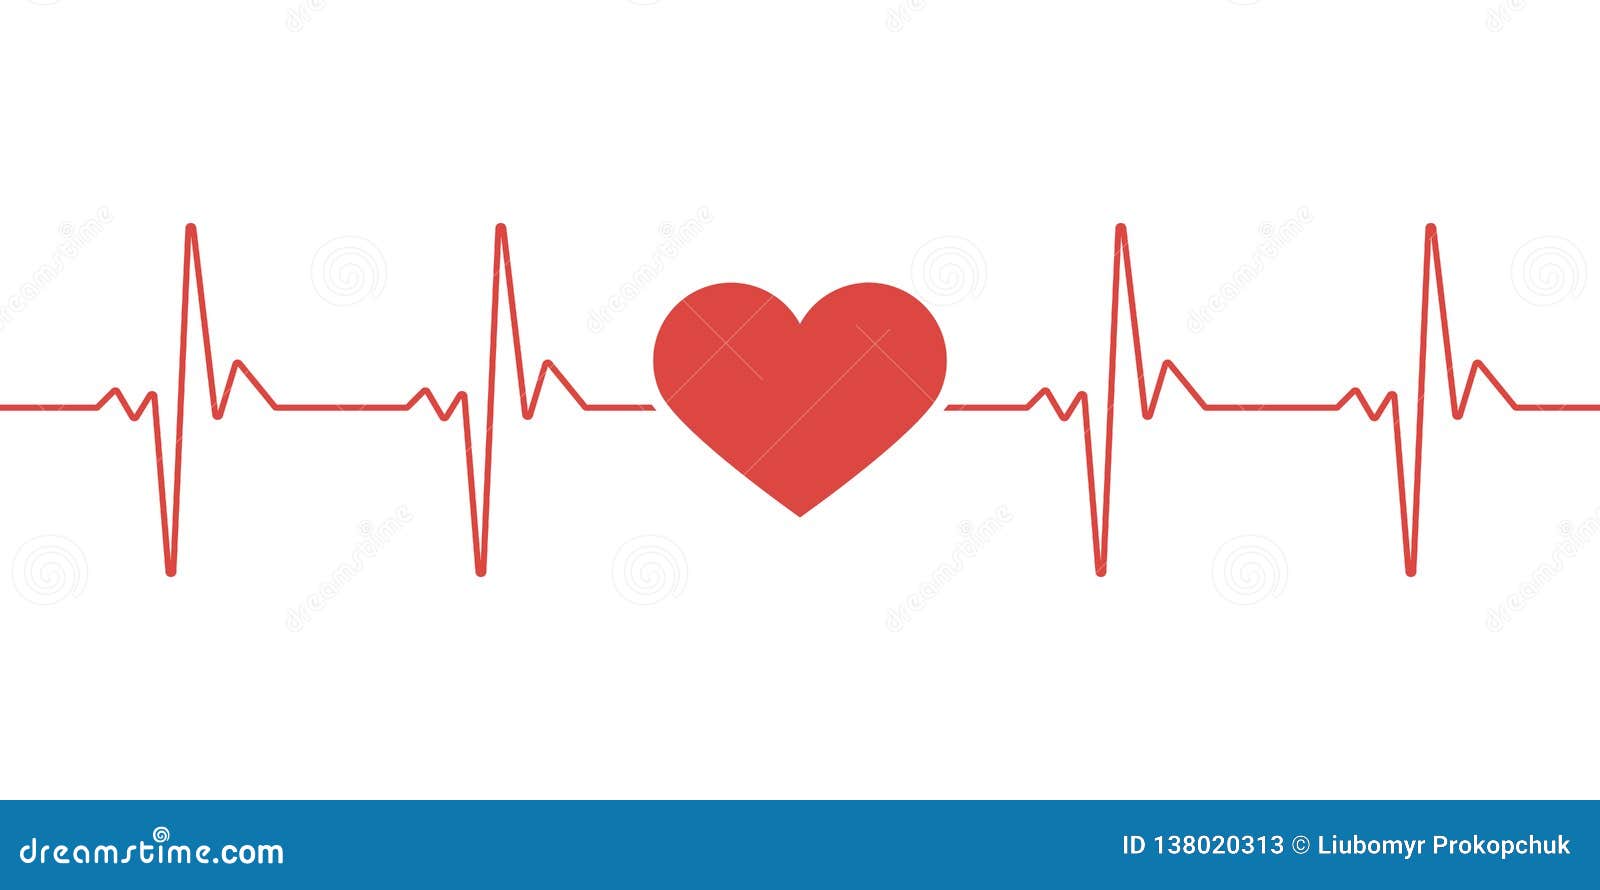 heart pulse. red and white colors. heartbeat lone, cardiogram. beautiful healthcare, medical background. modern simple .